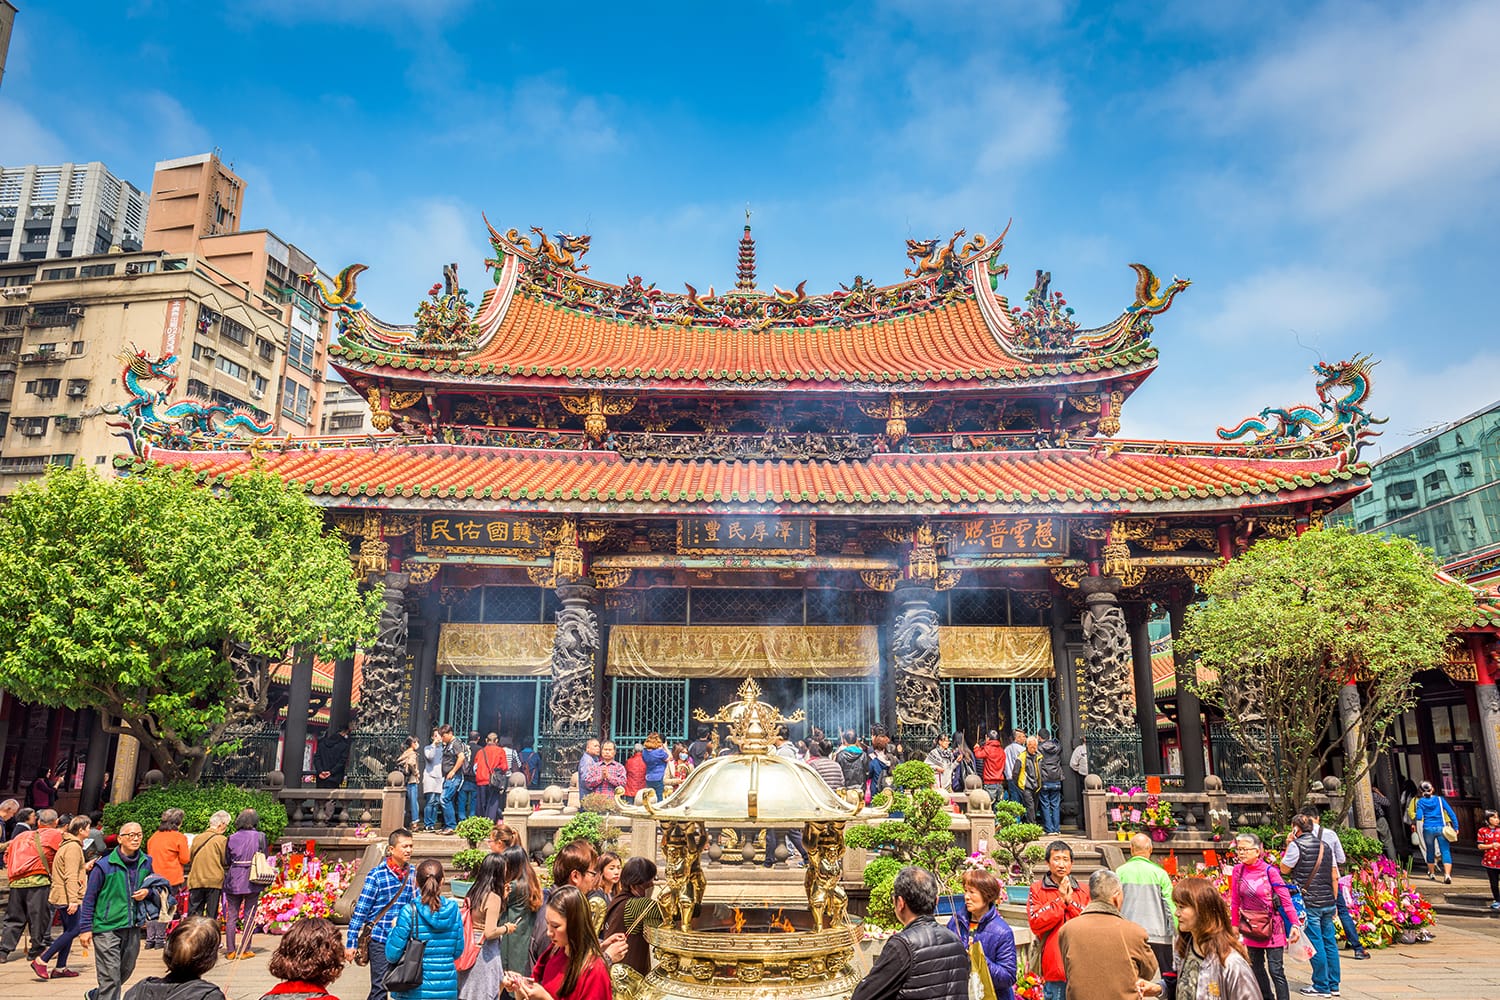 Crowds at Lungshan Temple of Manka in Taipei, Taiwan